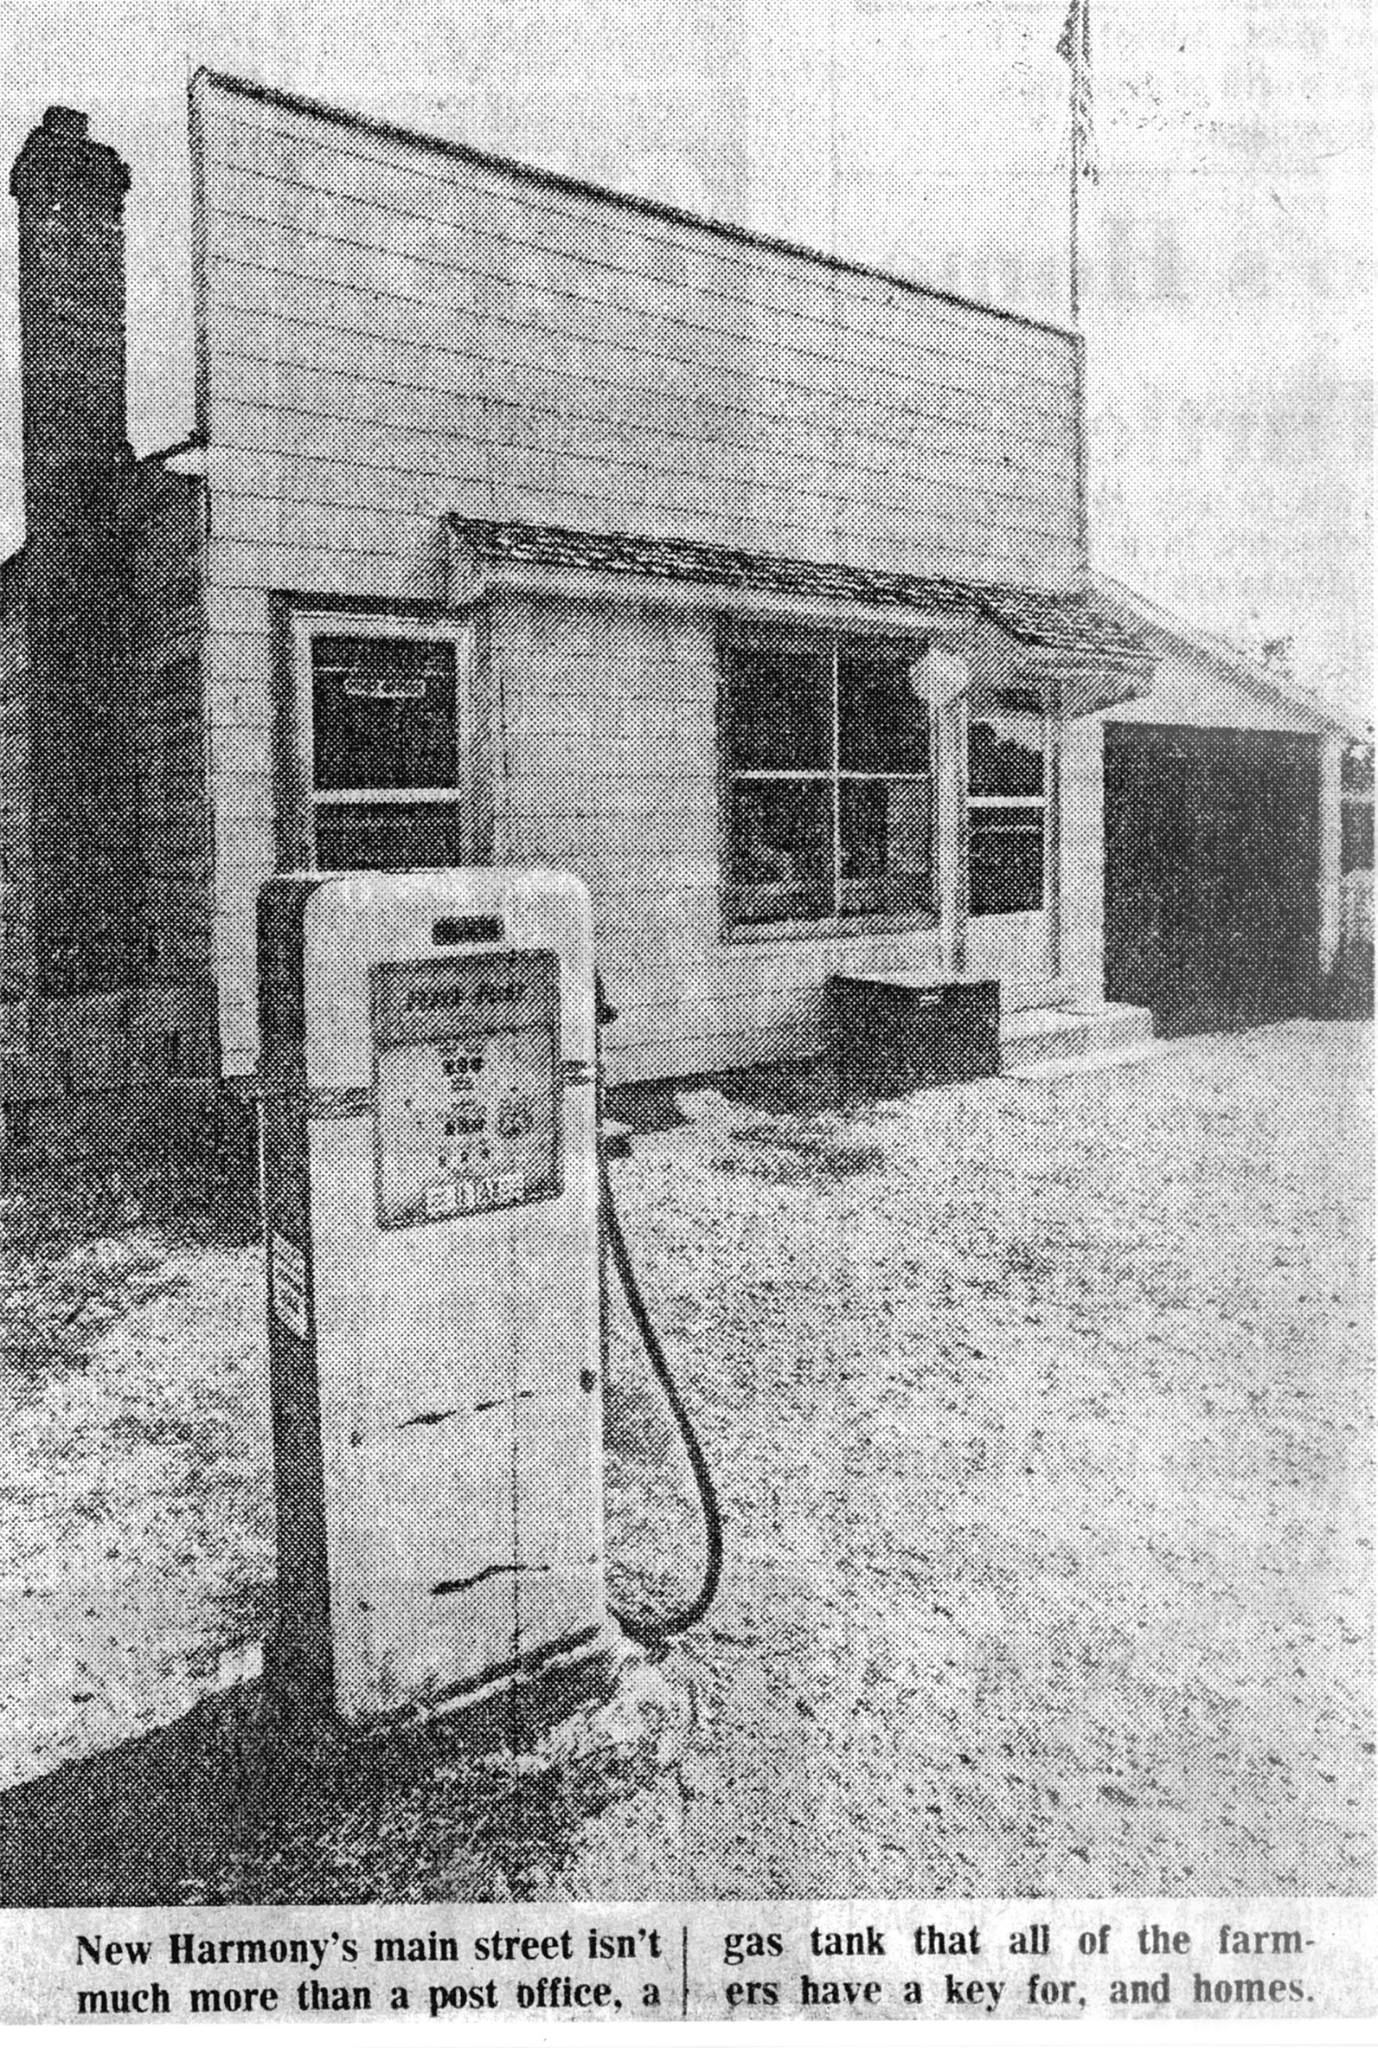 New Harmony post office with the old metered gas pump in front